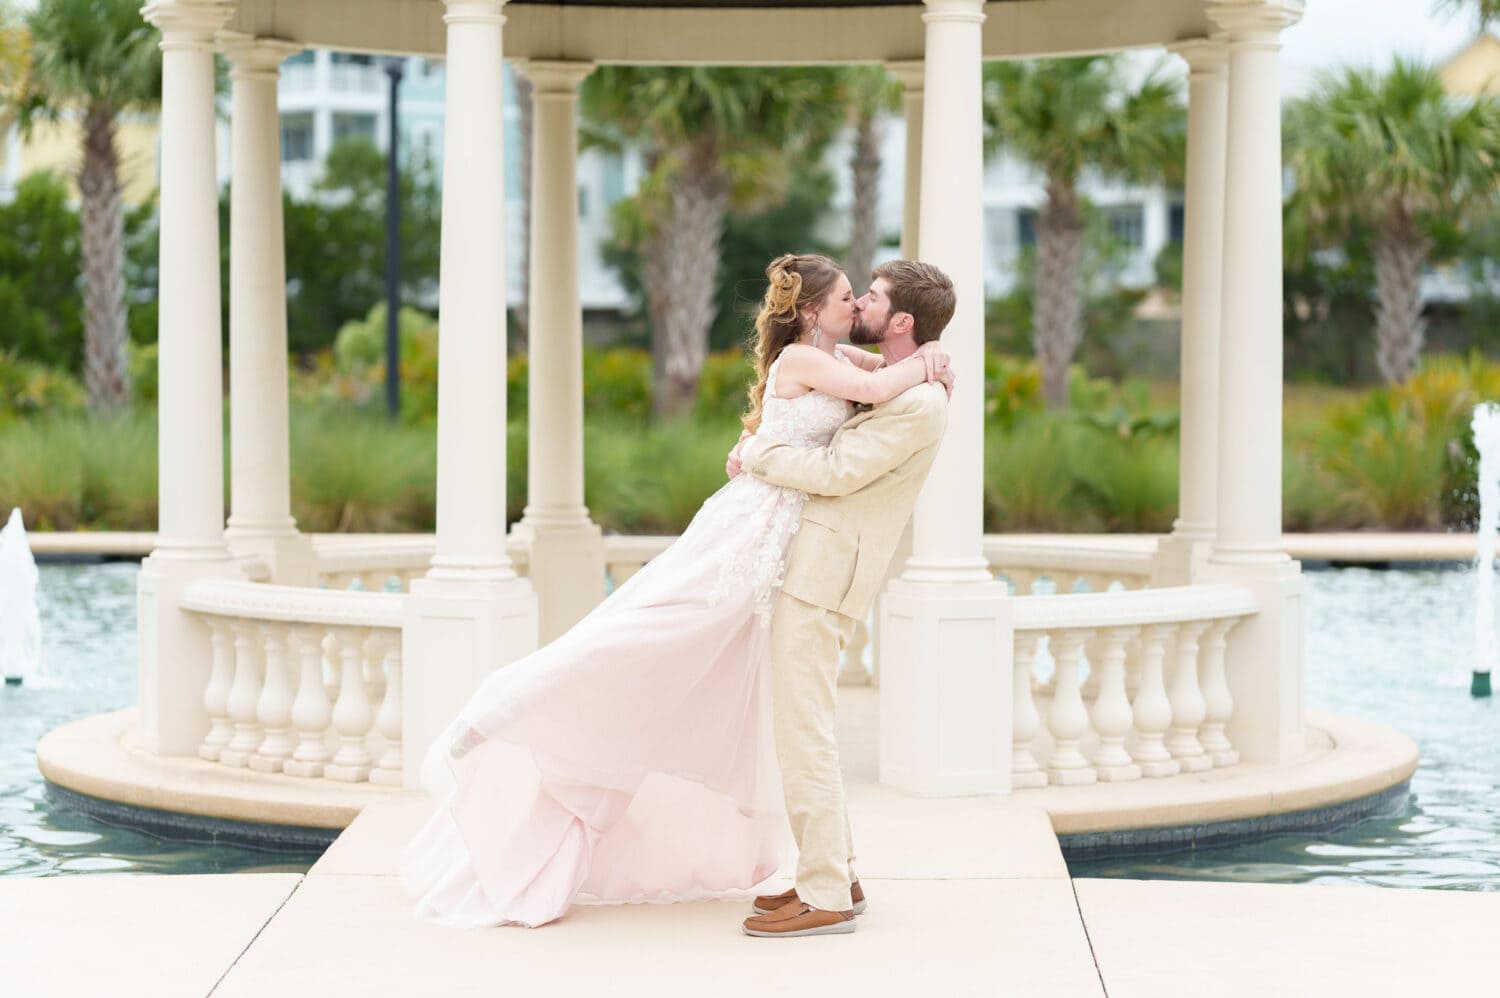 Lifting bride into the air for a kiss - 21 Main Events - North Myrtle Beach